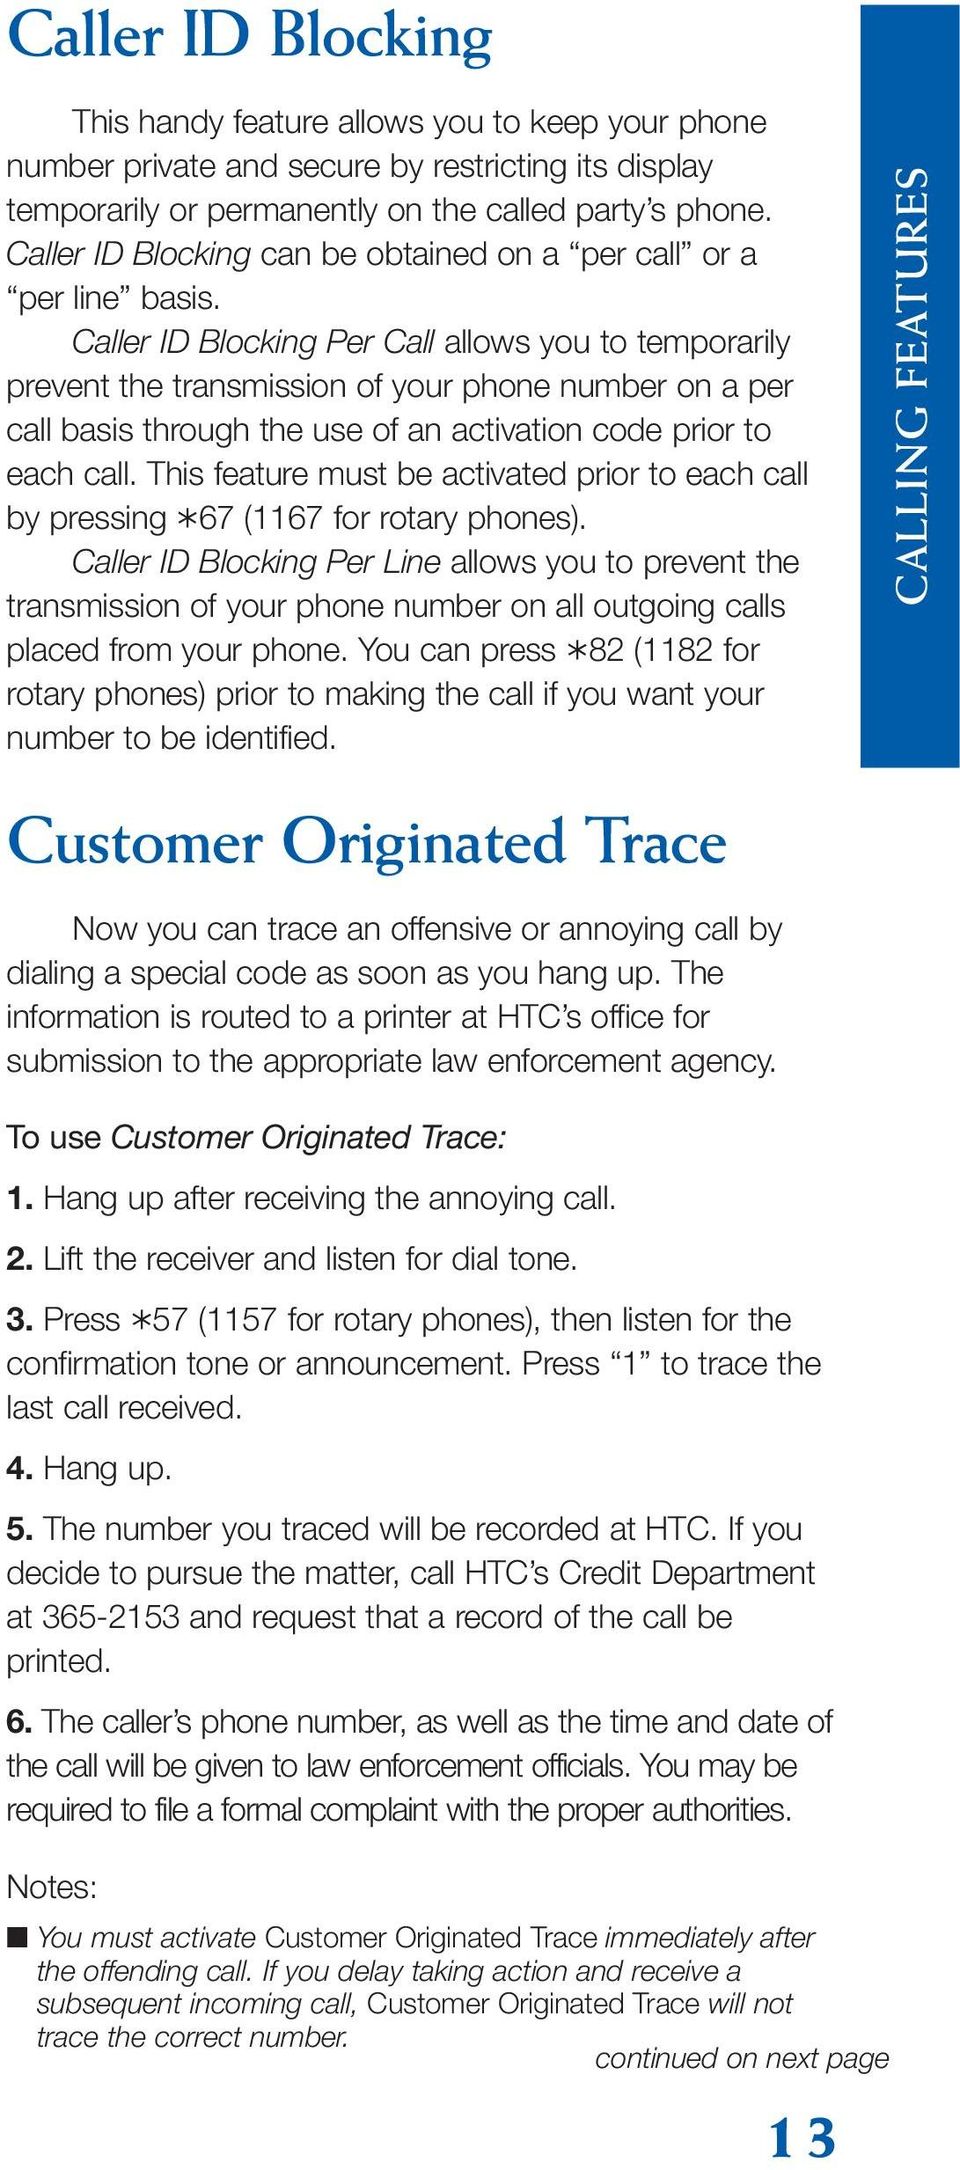 Caller ID Blocking Per Call allows you to temporarily prevent the transmission of your phone number on a per call basis through the use of an activation code prior to each call.